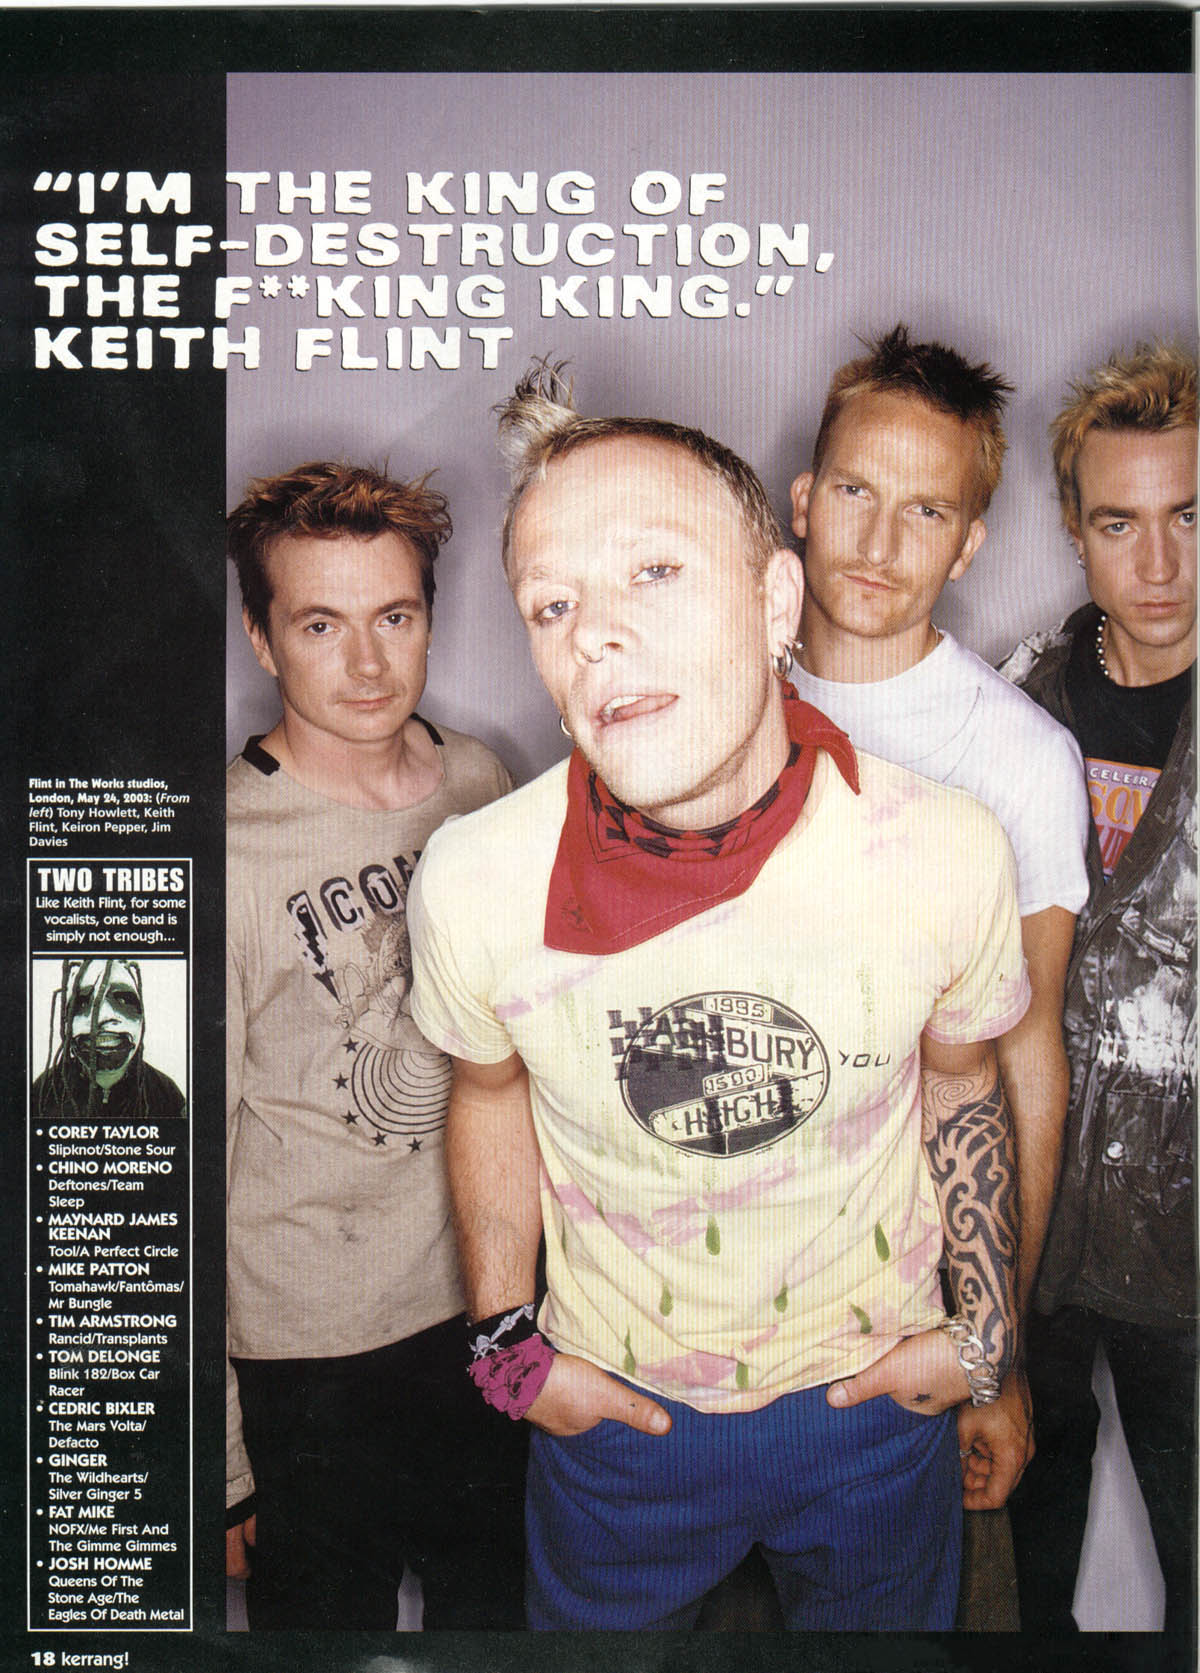 Prodigy their. The Prodigy their Law the Singles 1990-2005. Prodigy their Law альбом. The Prodigy their Law обложка.